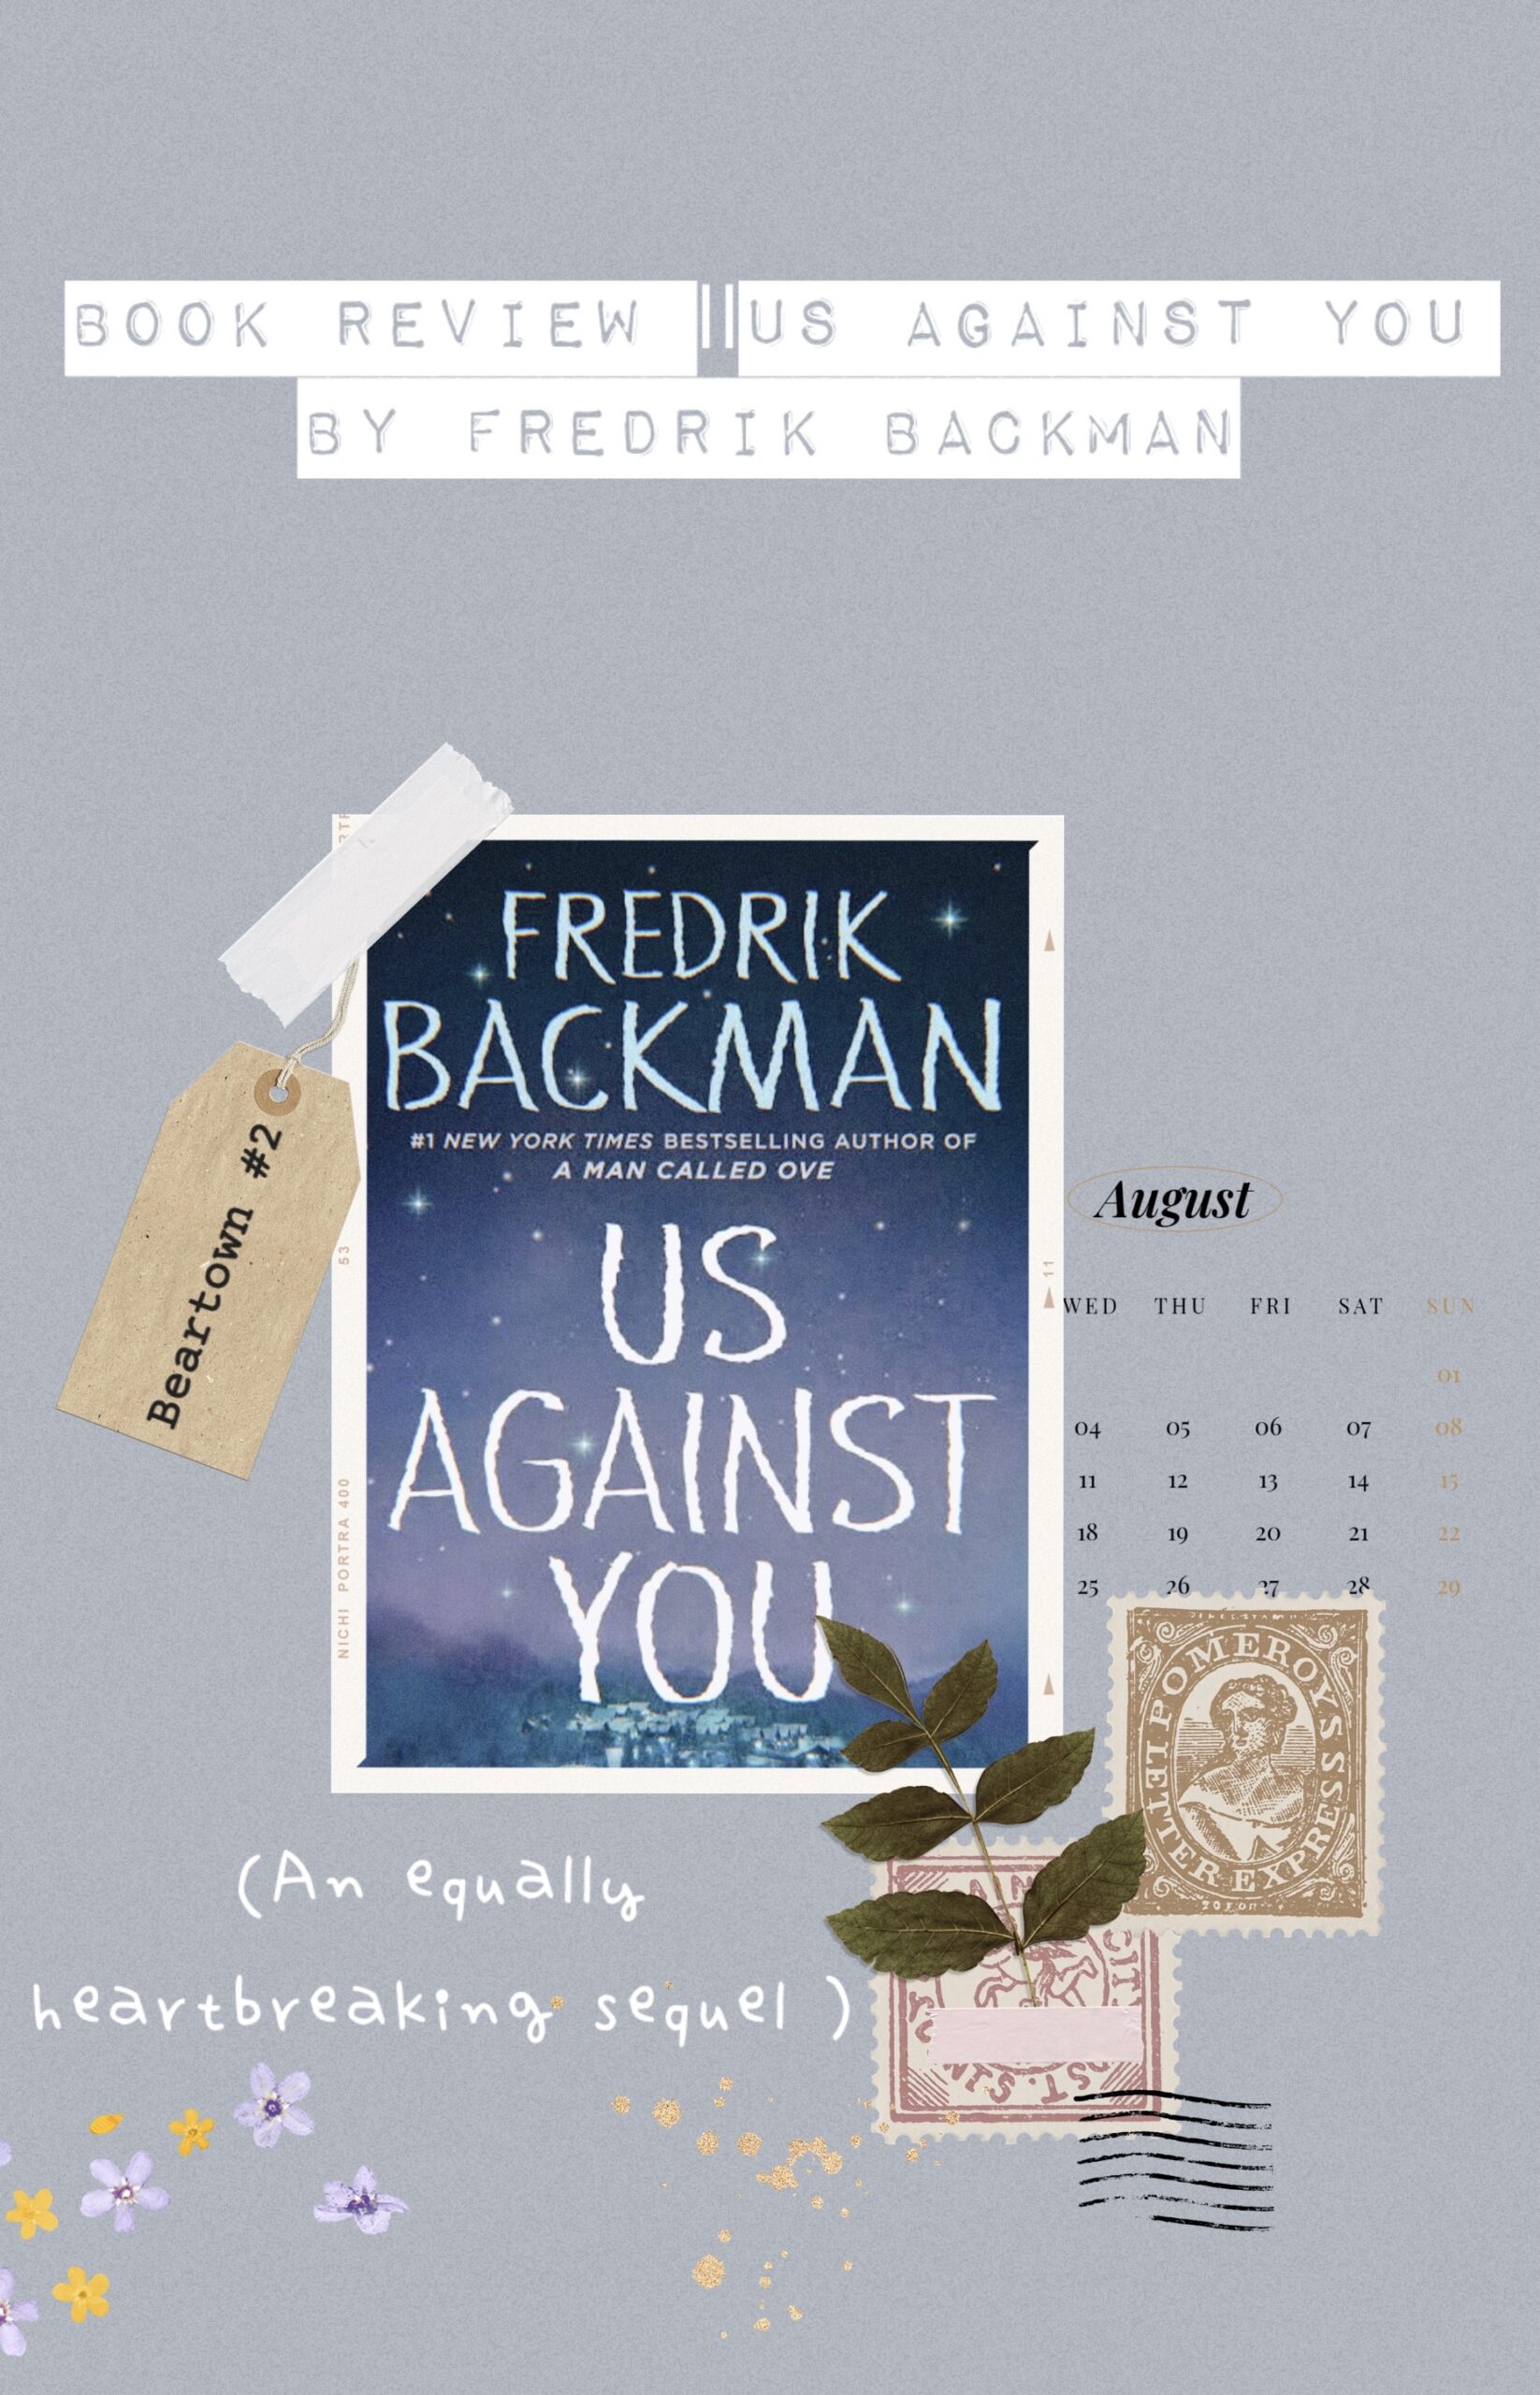 Book Review Us Against You by Fredrik Backman